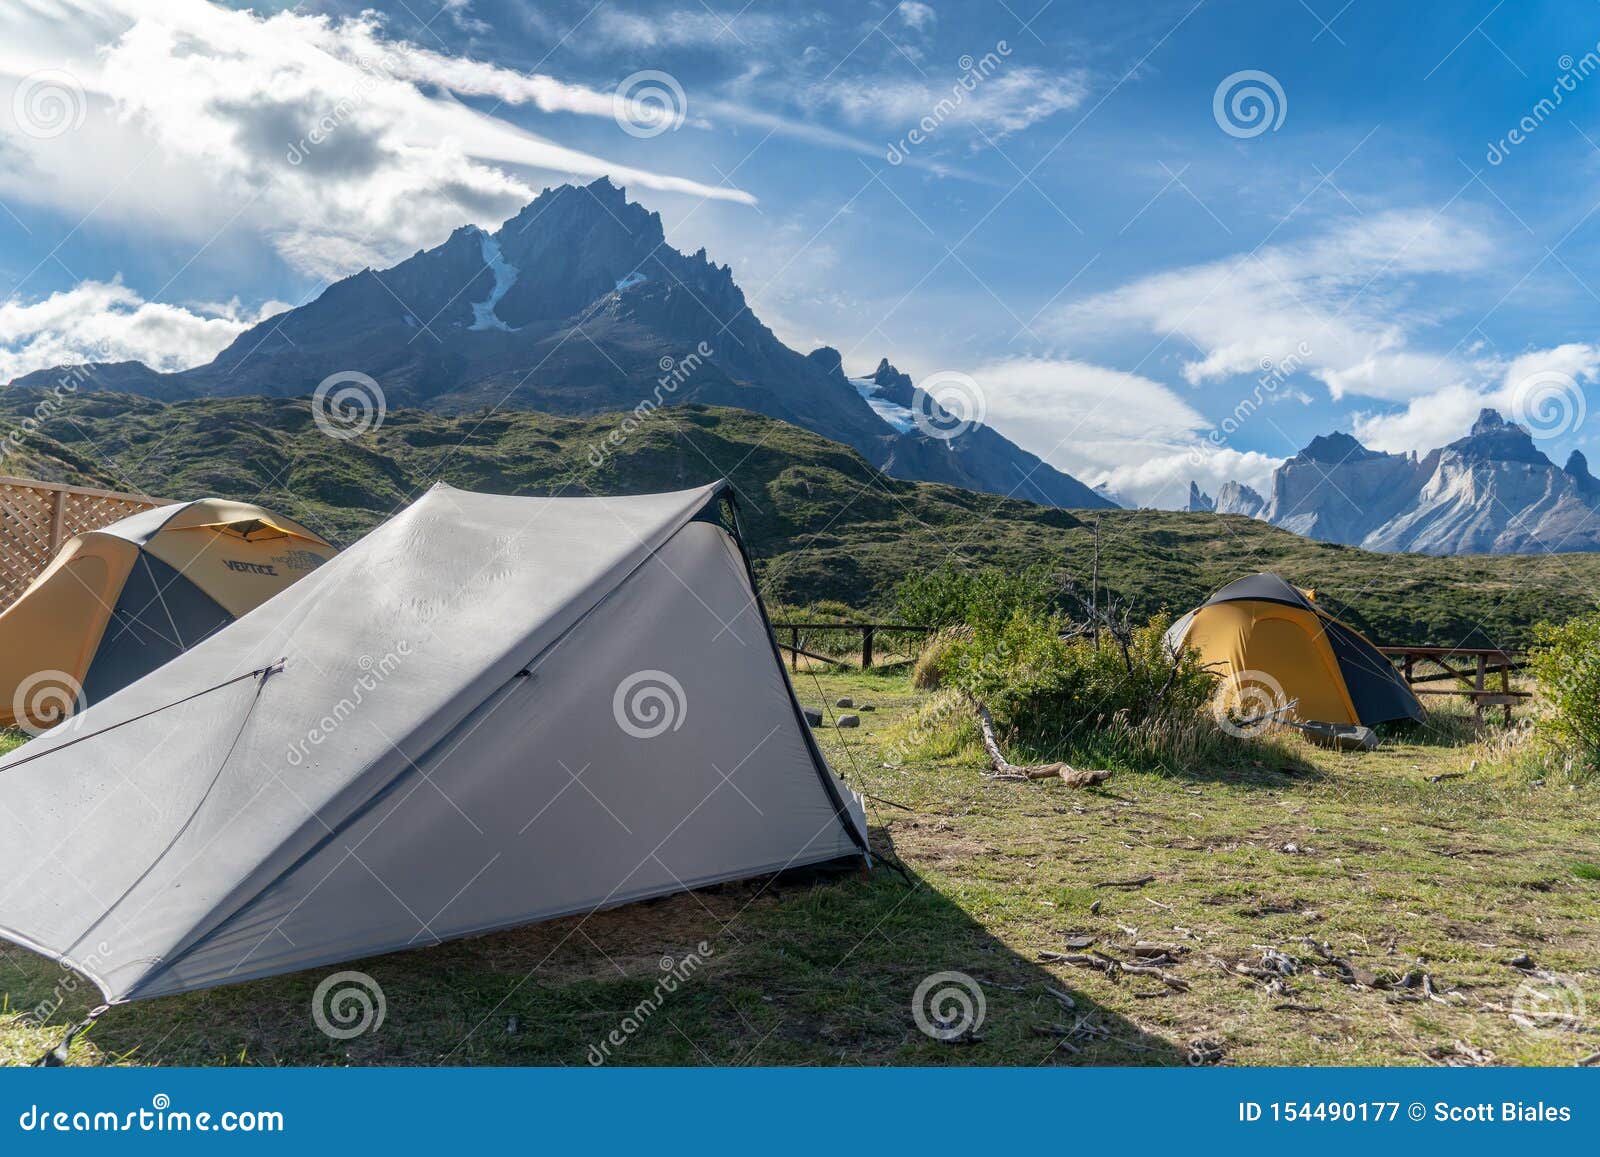 Pitched Tent Mountains Patagonia Stock Image - Image of nature,